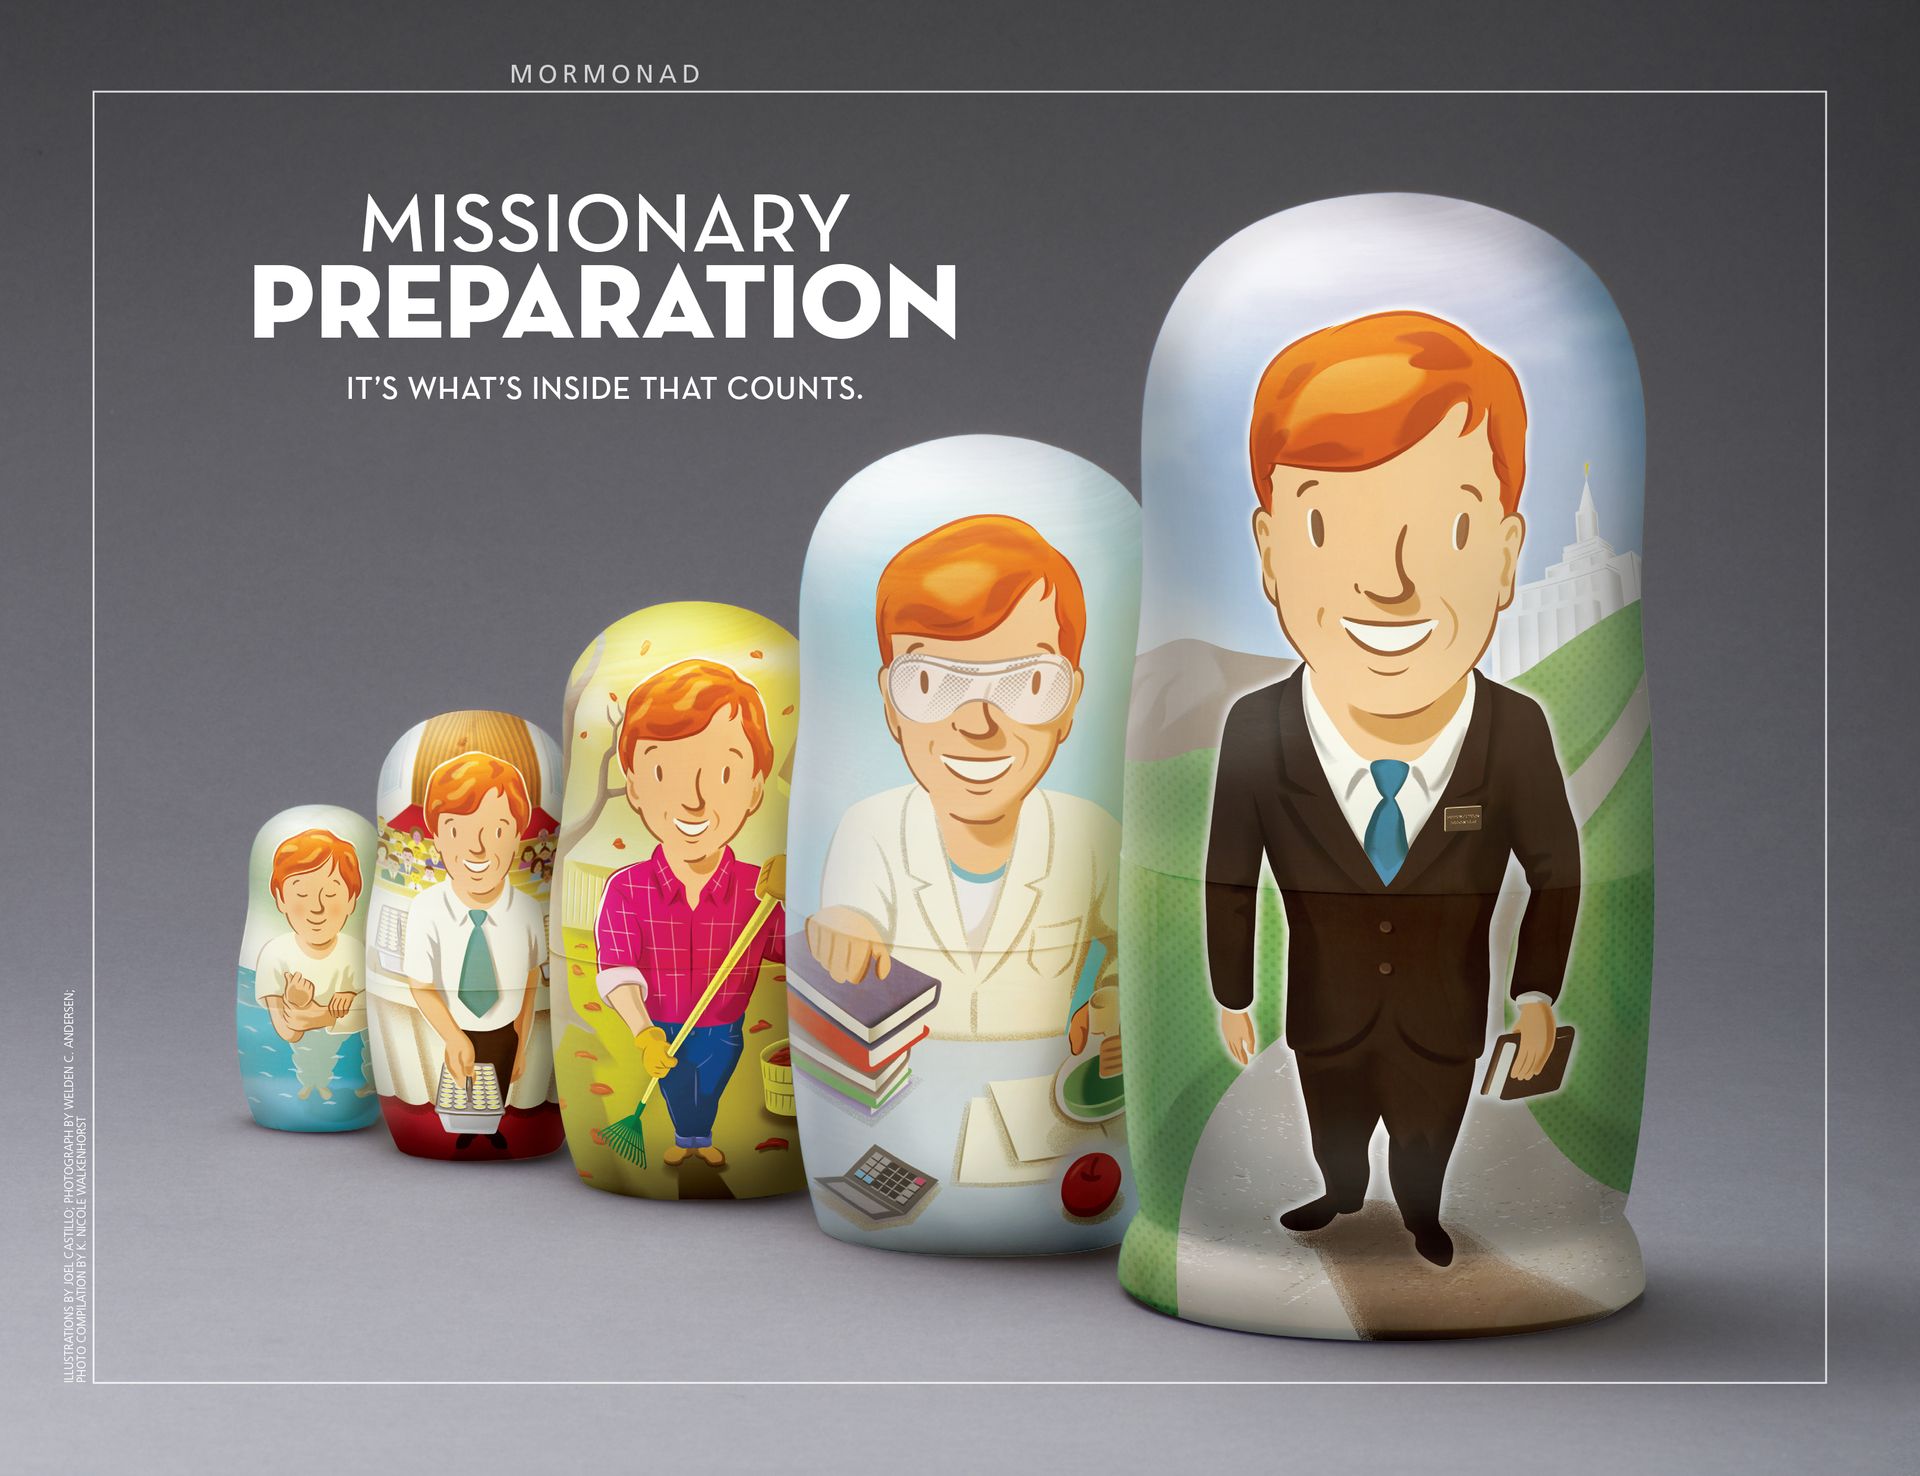 Missionary Preparation. It’s what’s inside that counts. Oct. 2013 © undefined ipCode 1.